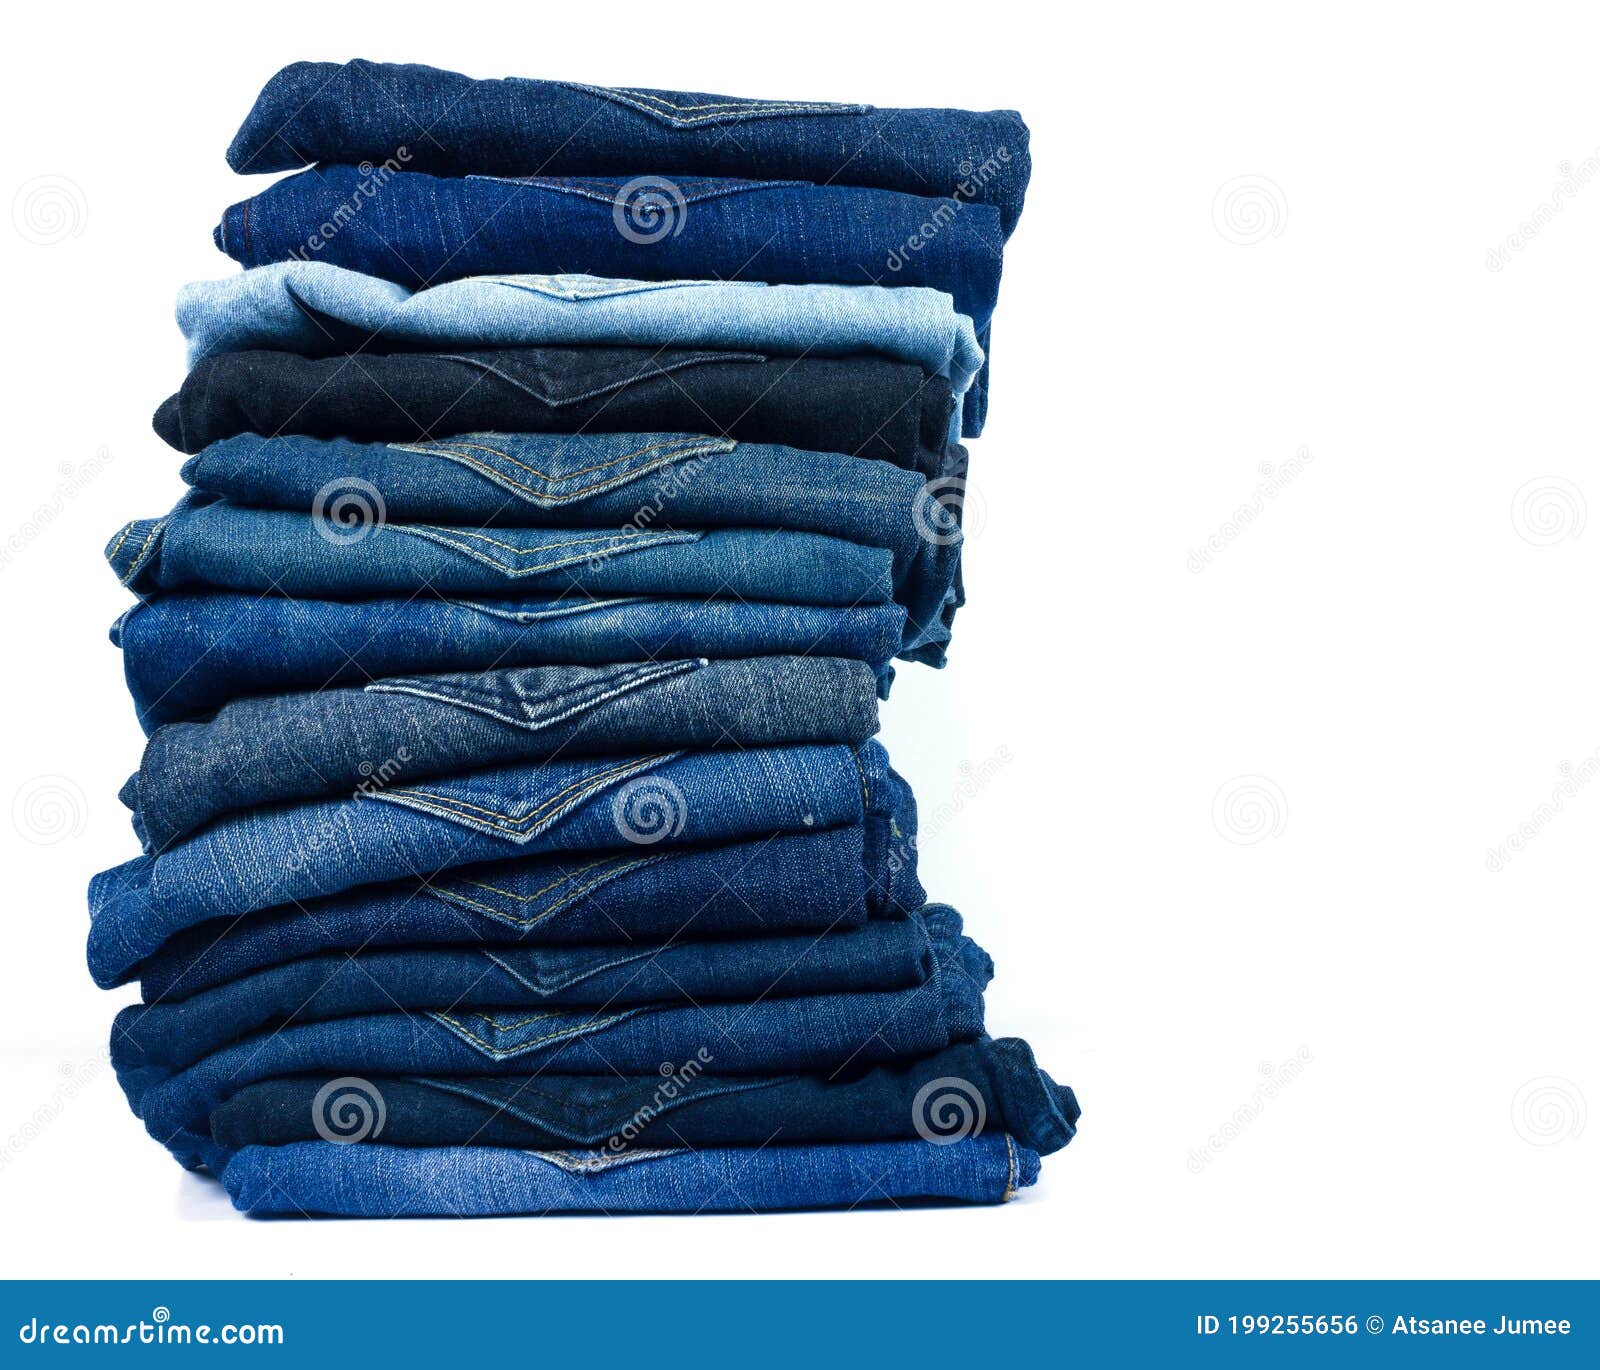 Jeans Stacked Isolated on White Background Stock Photo - Image of ...